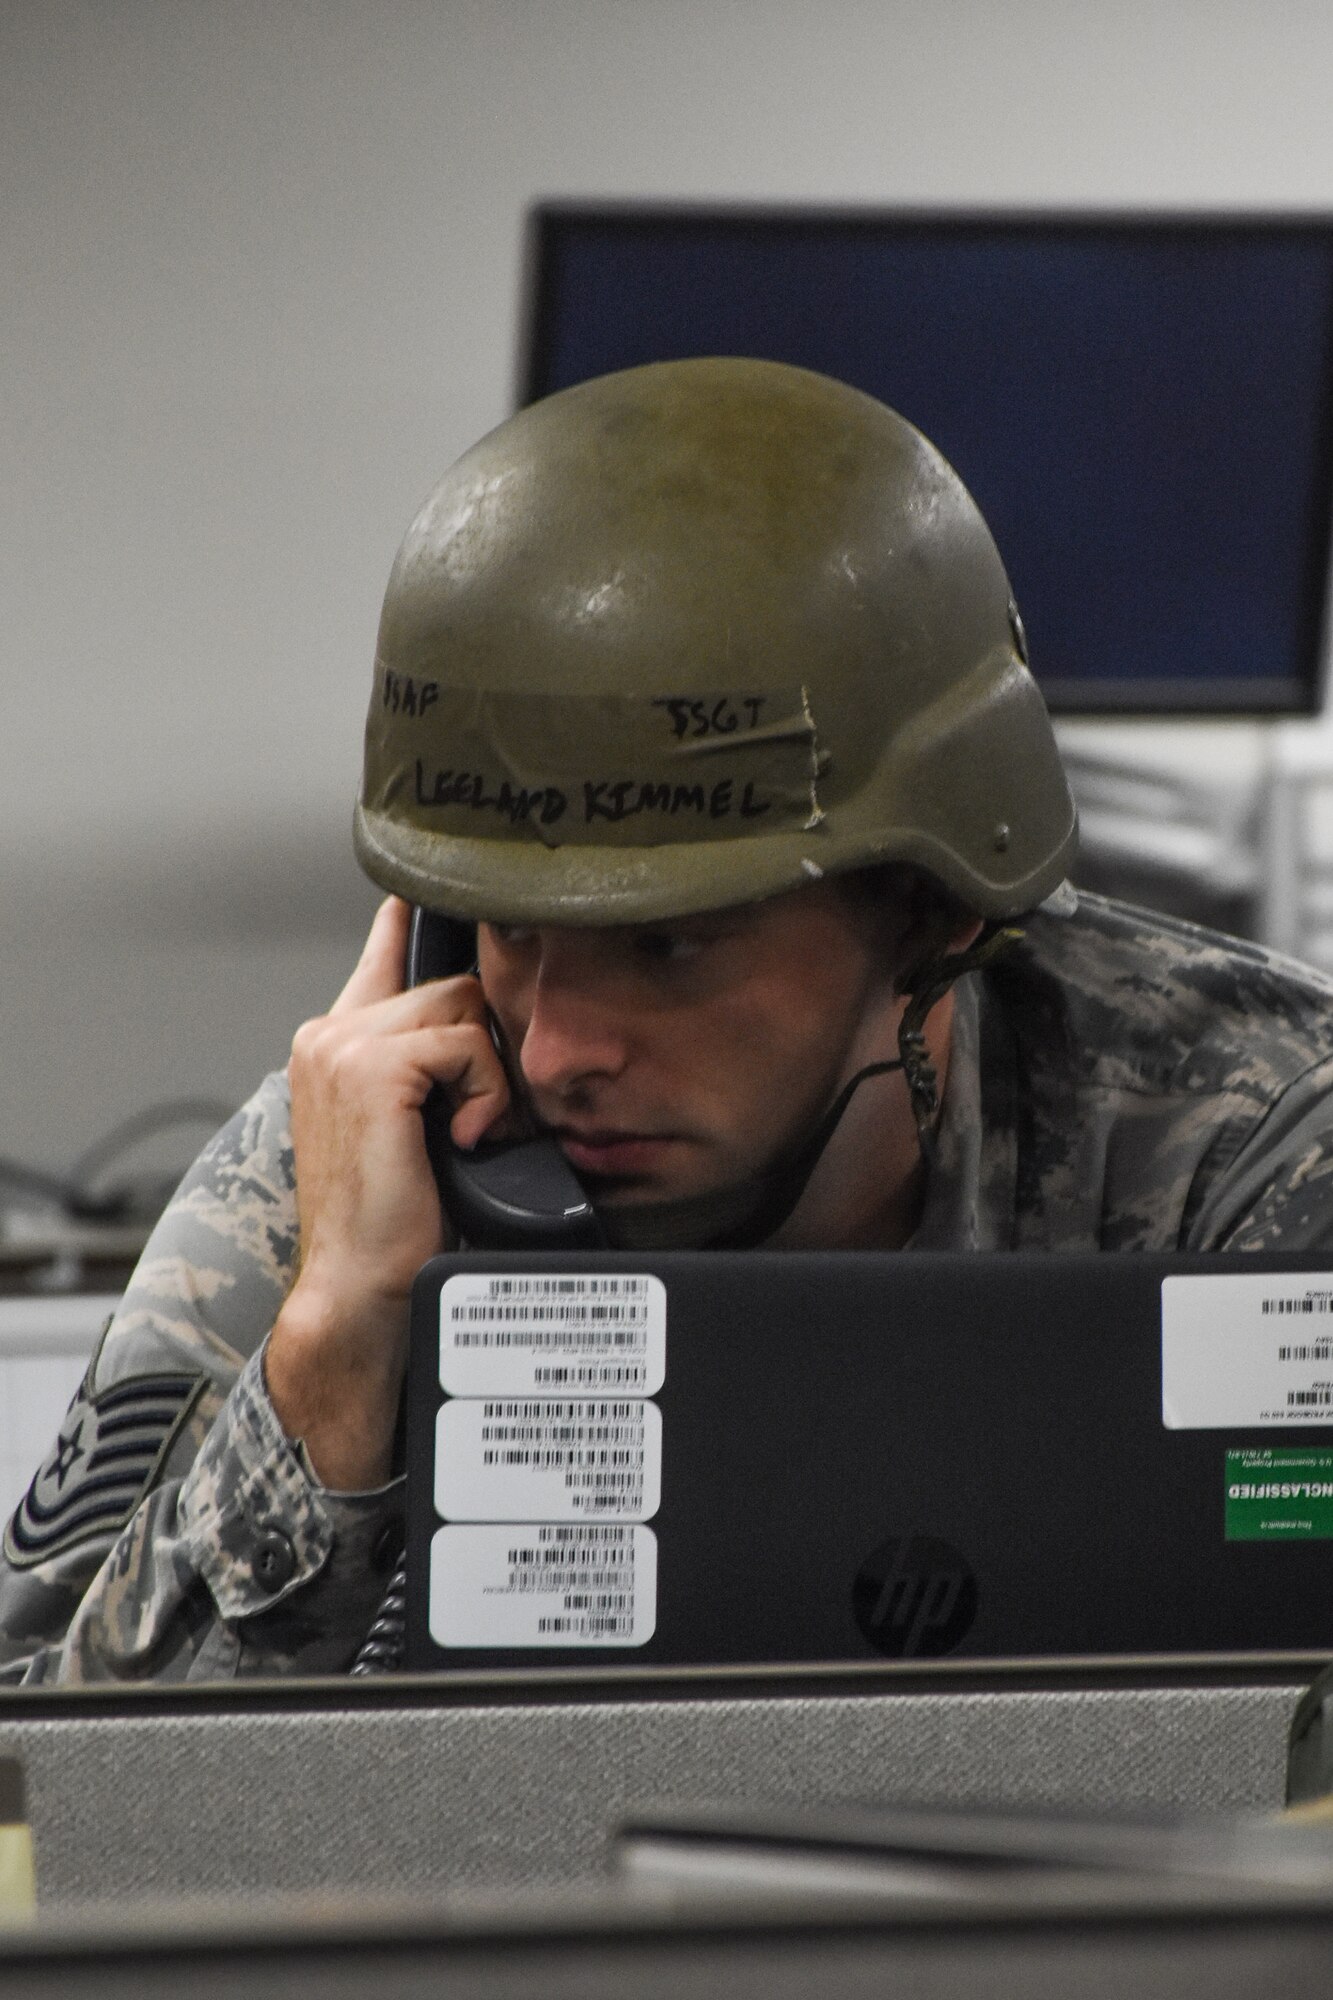 Tech. Sgt. Leeland Kimmel, a client systems technician with the 442d Communications Flight, recieves a simulated emergency call during Ozark Thunder 20-01 at Whiteman Air Force Base, Mo., Nov. 3, 2019. Ozark Thunder 20-01 is a 3-day wing-level readiness exercise that aims to test the wing’s ability to survive and operate and perform mission essential tasks during contingency operations.